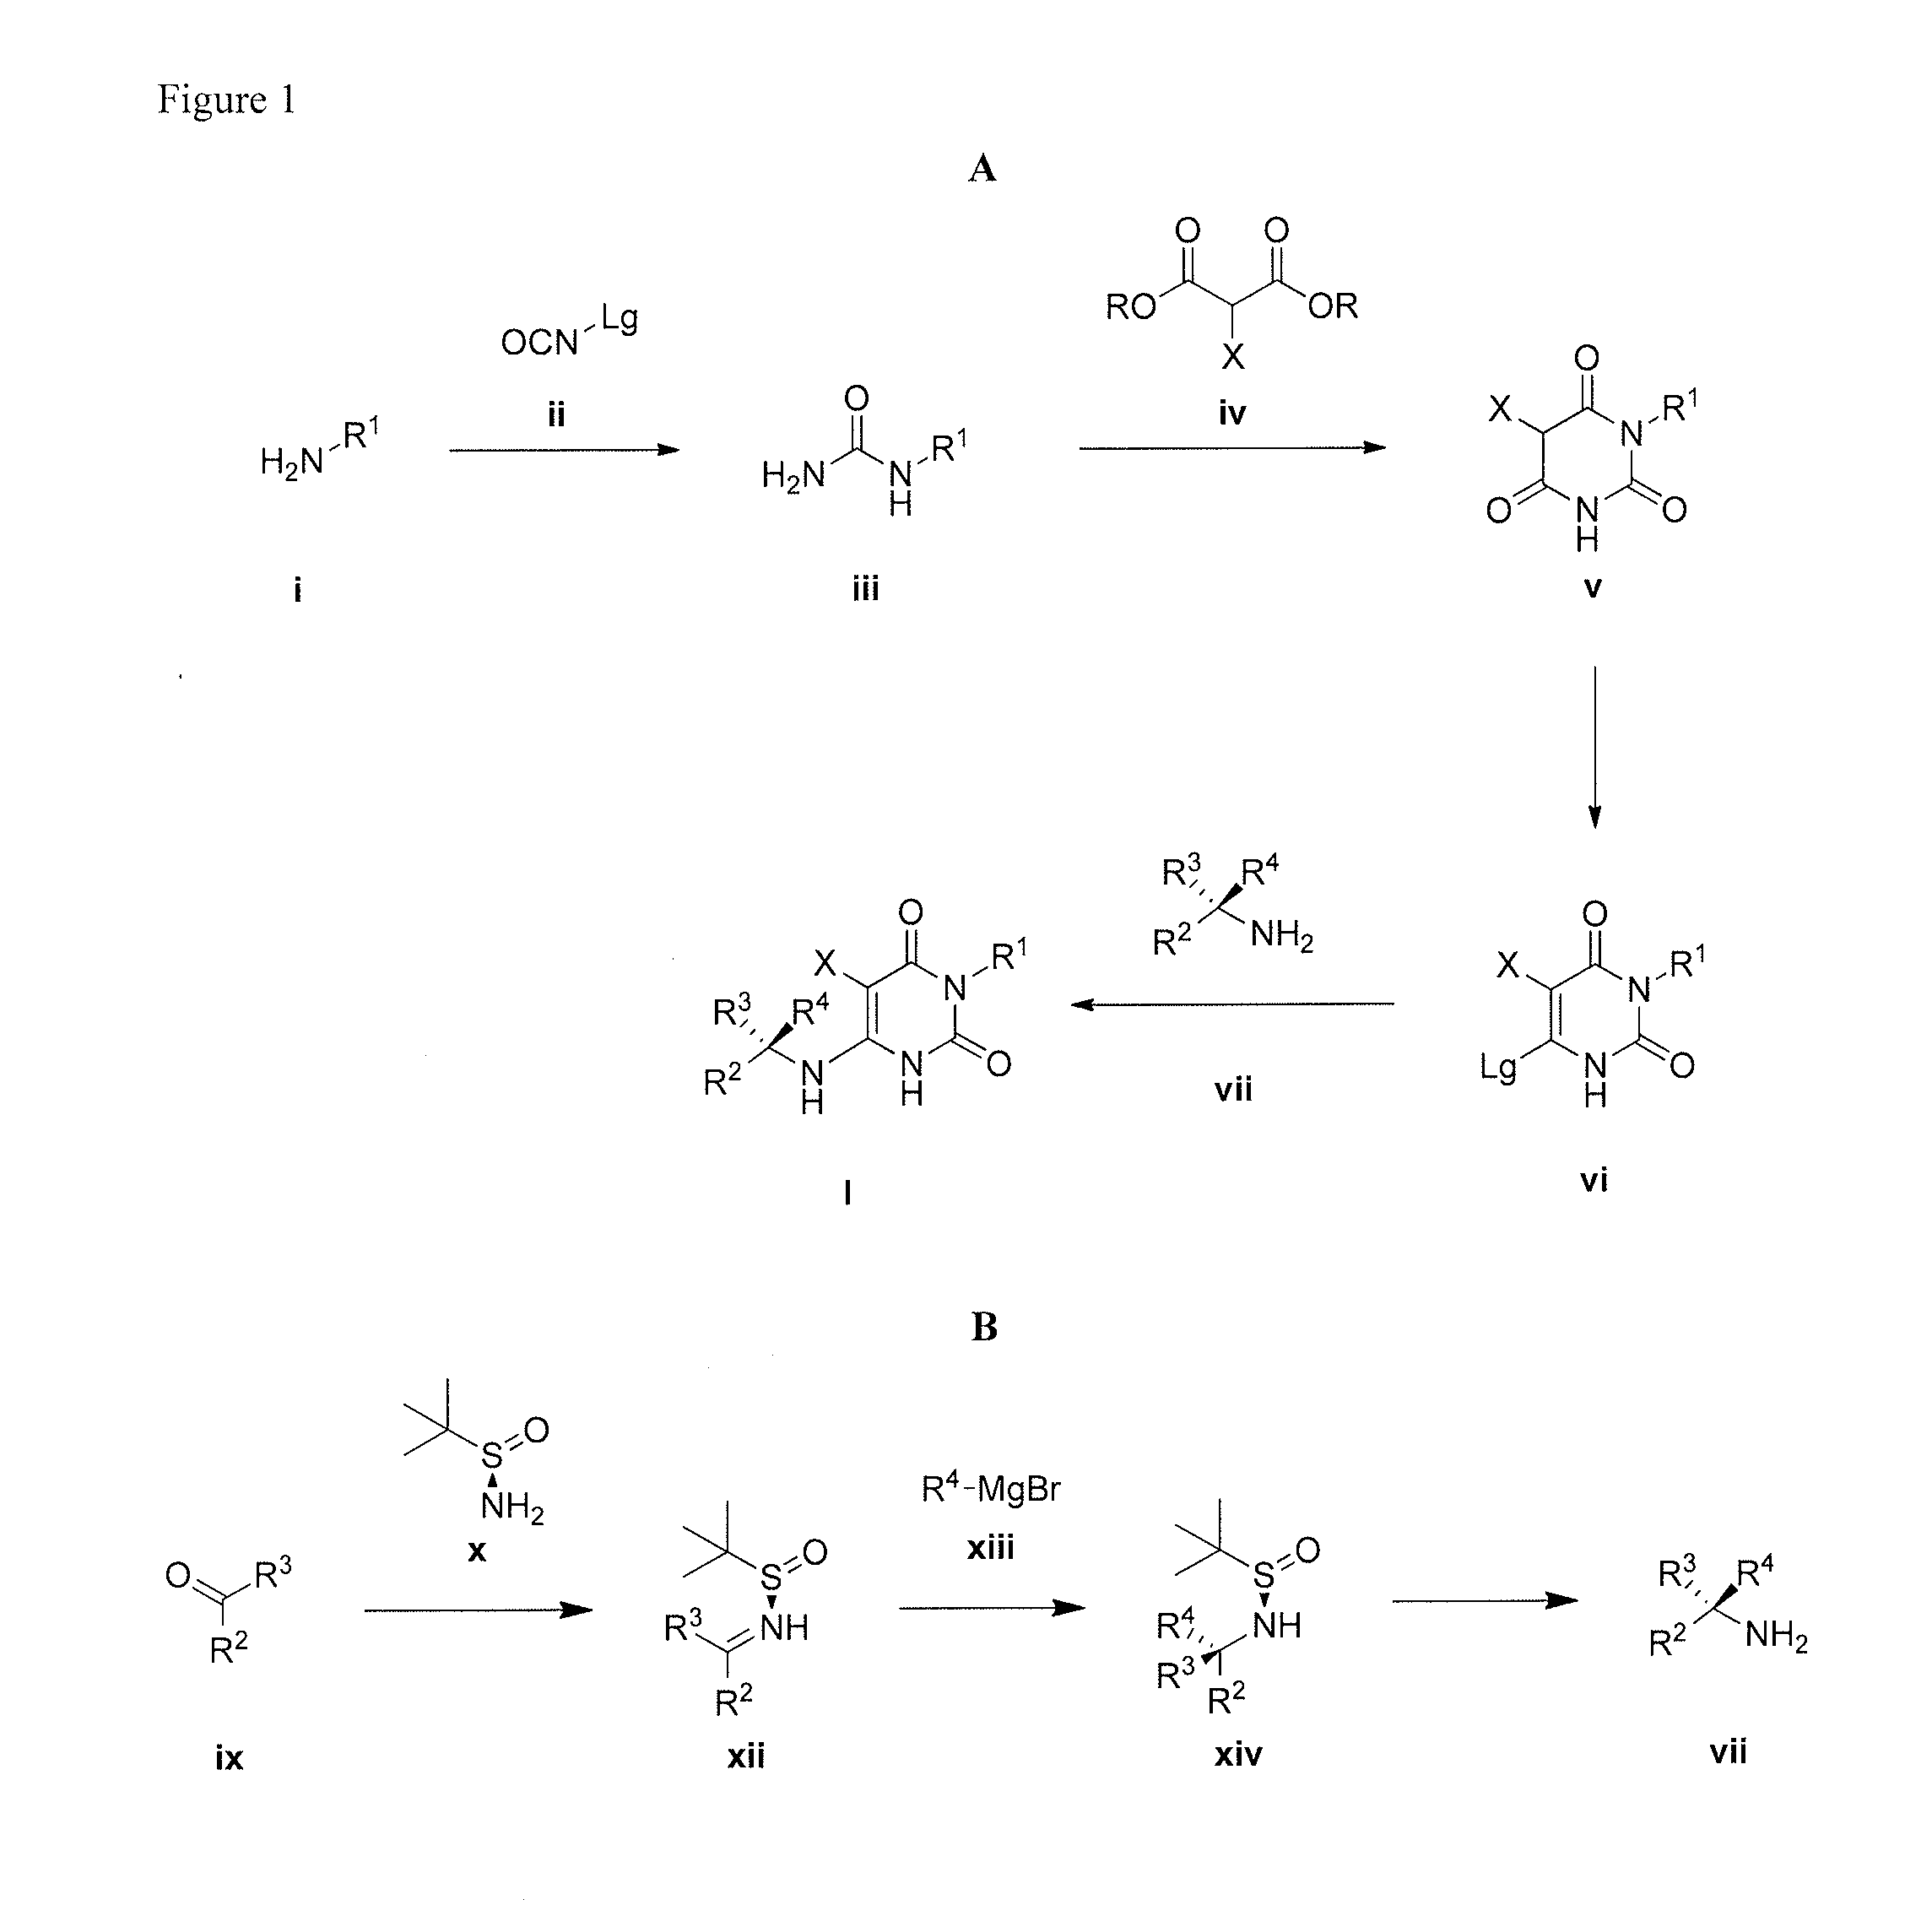 Cycloalkyl-substituted pyrimidinedione compounds